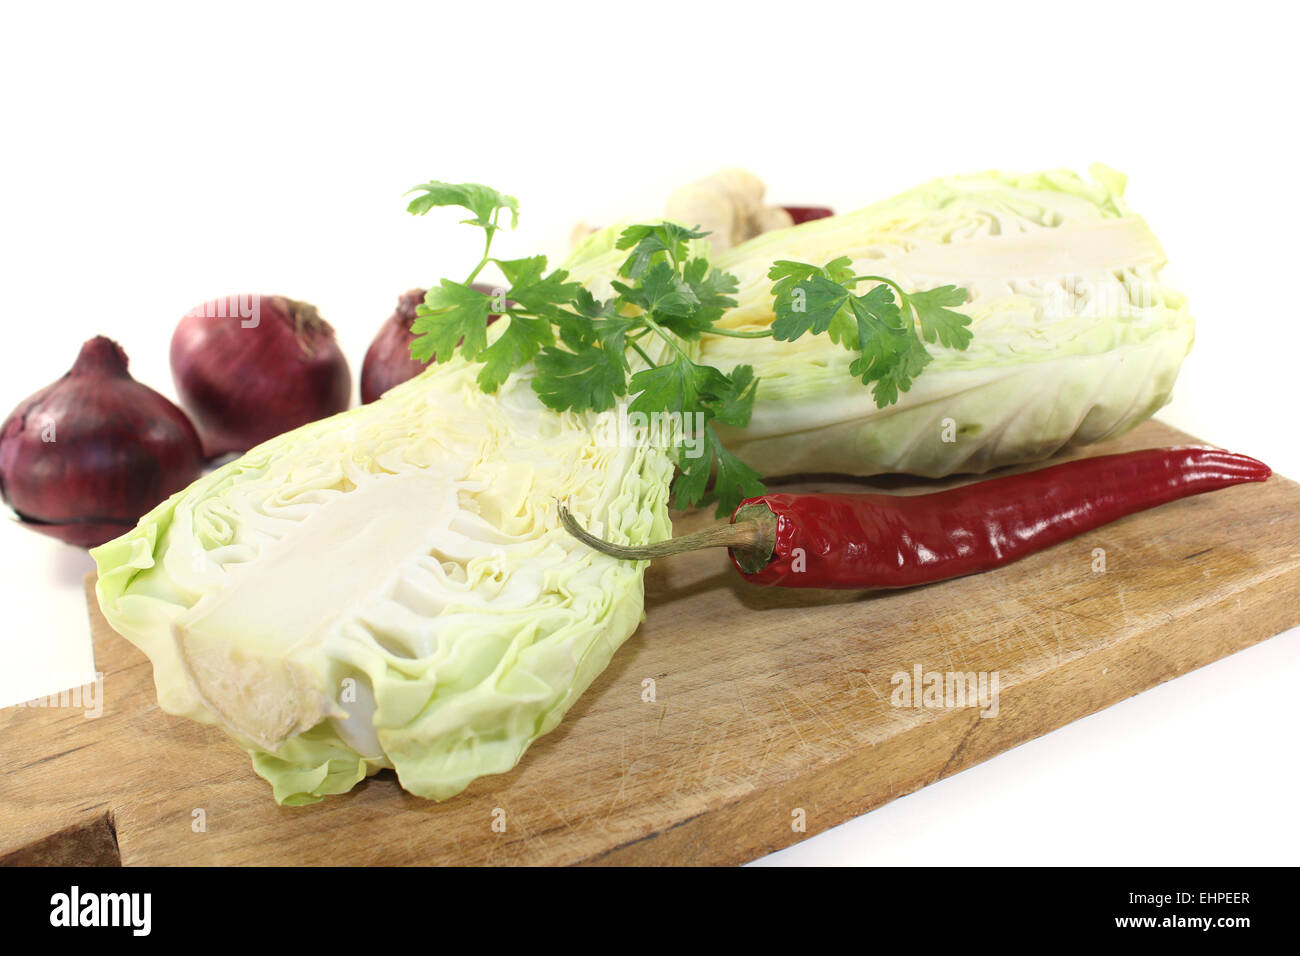 sweetheart cabbage with parsley and onions Stock Photo